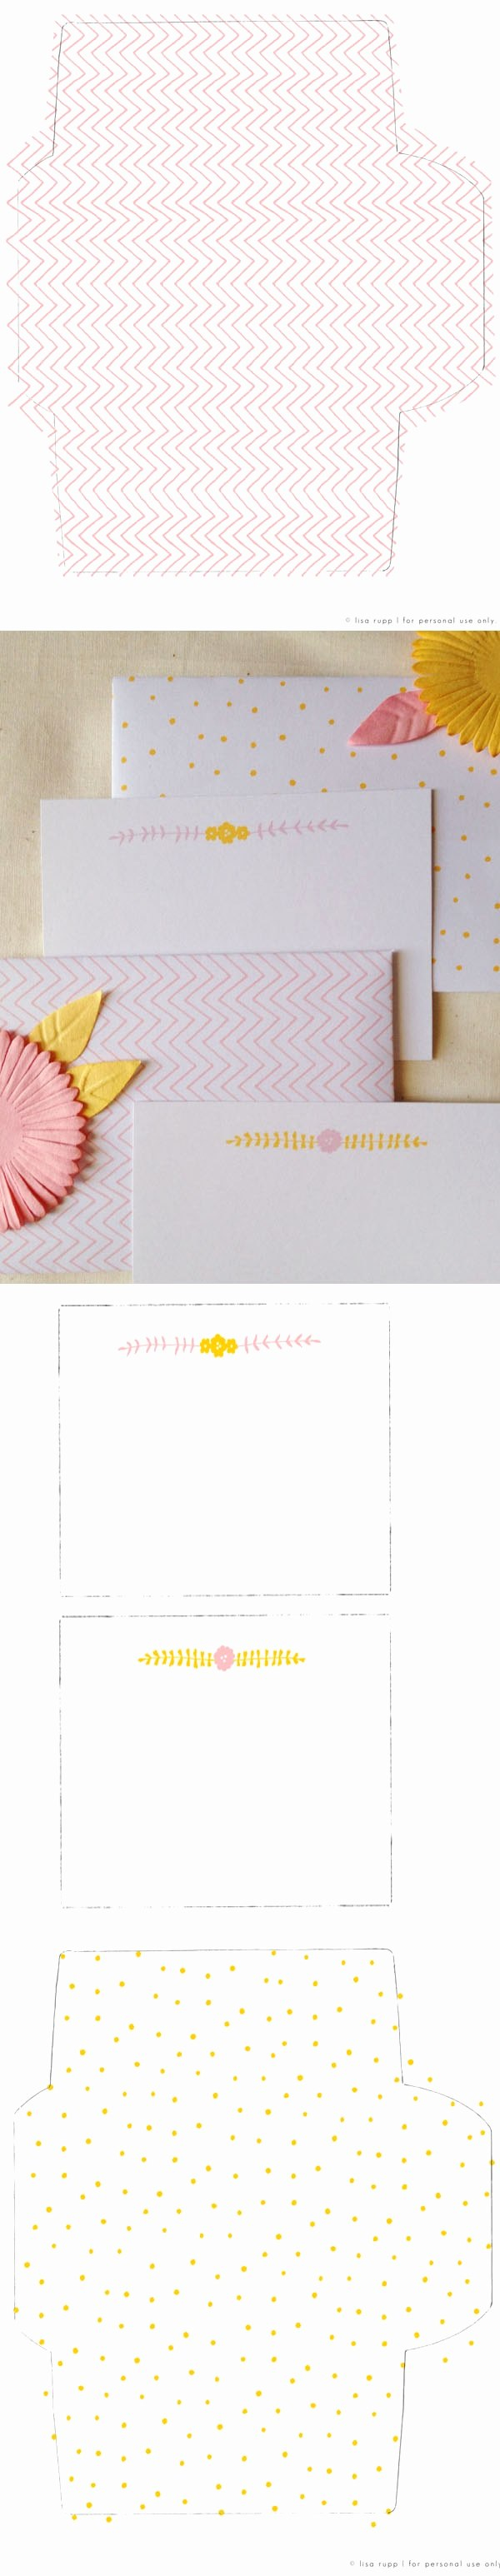 Paper Source Templates Place Cards – Emelinespace in Paper Source Templates Place Cards